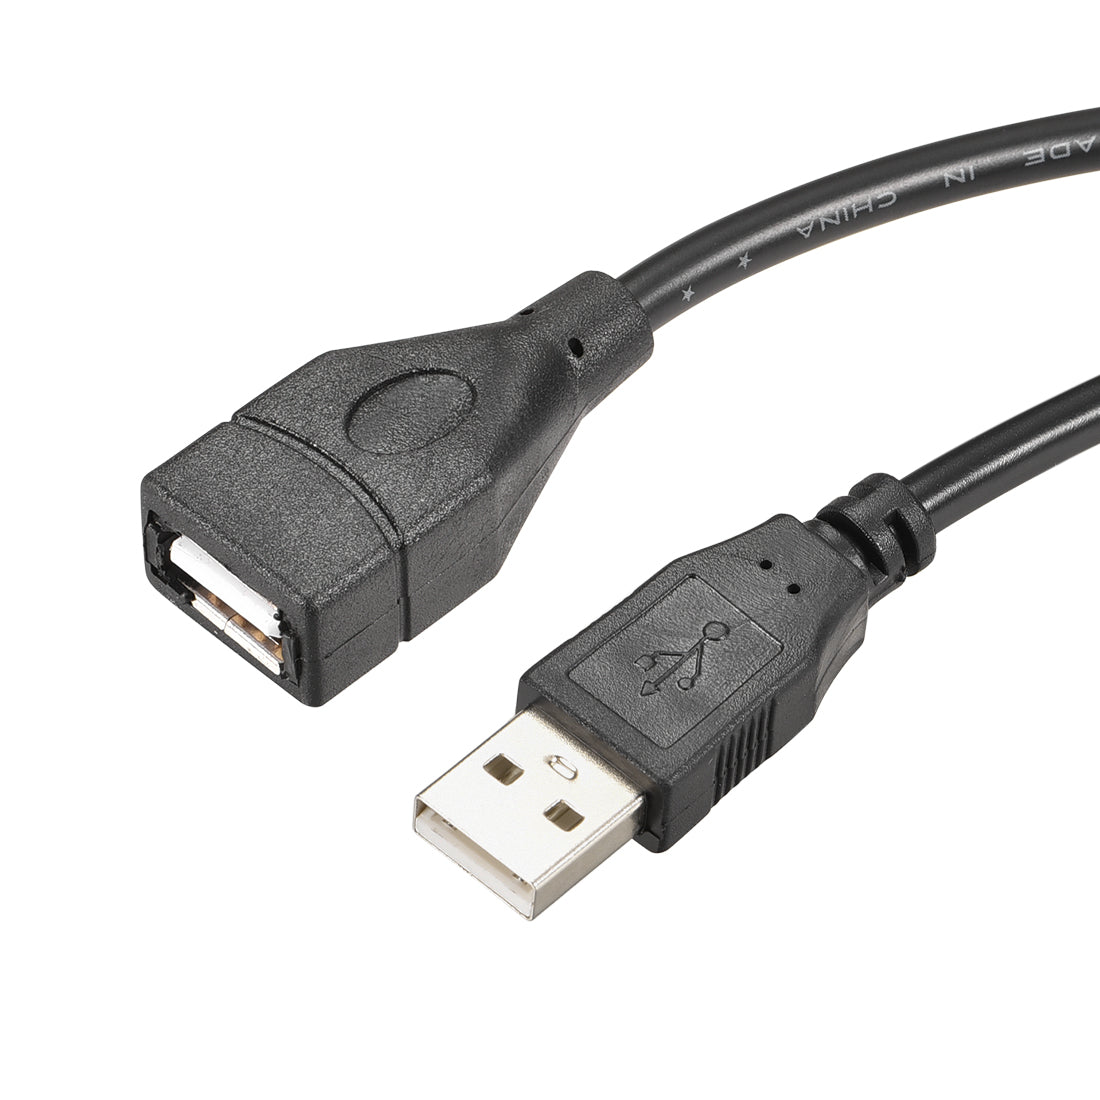 uxcell Uxcell USB Extension Cable,3meter Type a Male to USB a Female USB Wire Black